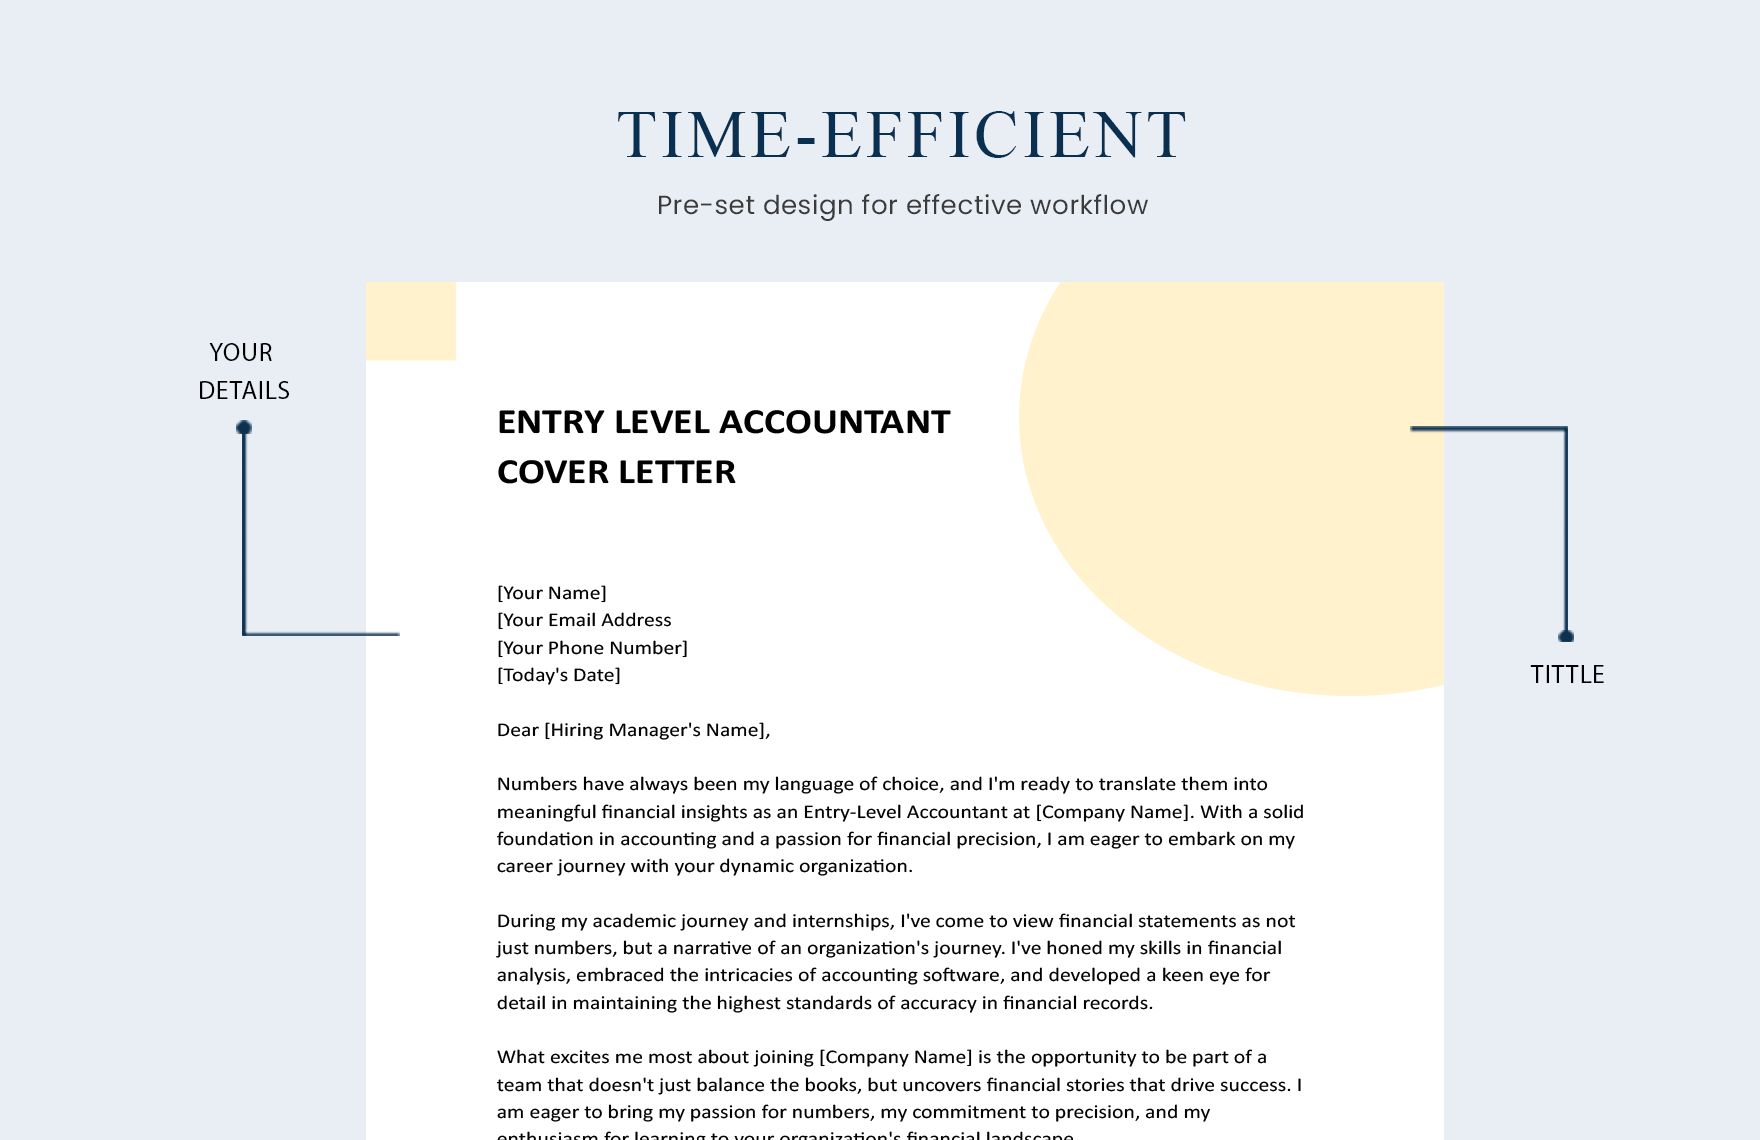 Entry Level Accountant Cover Letter